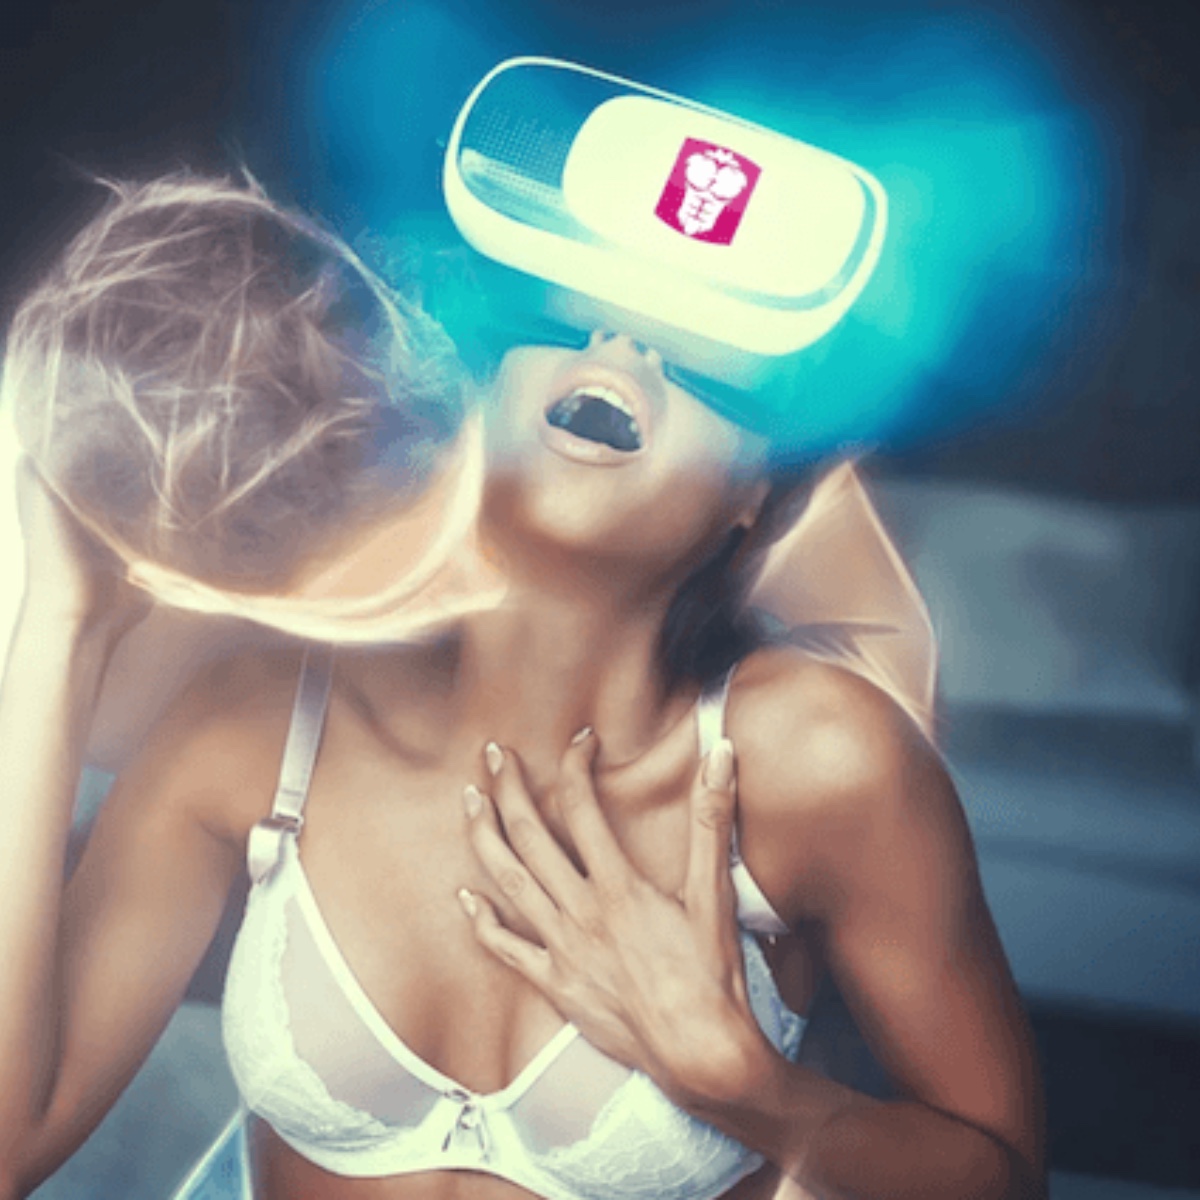 RealDoll and Virtual Reality: A New Level of Interaction